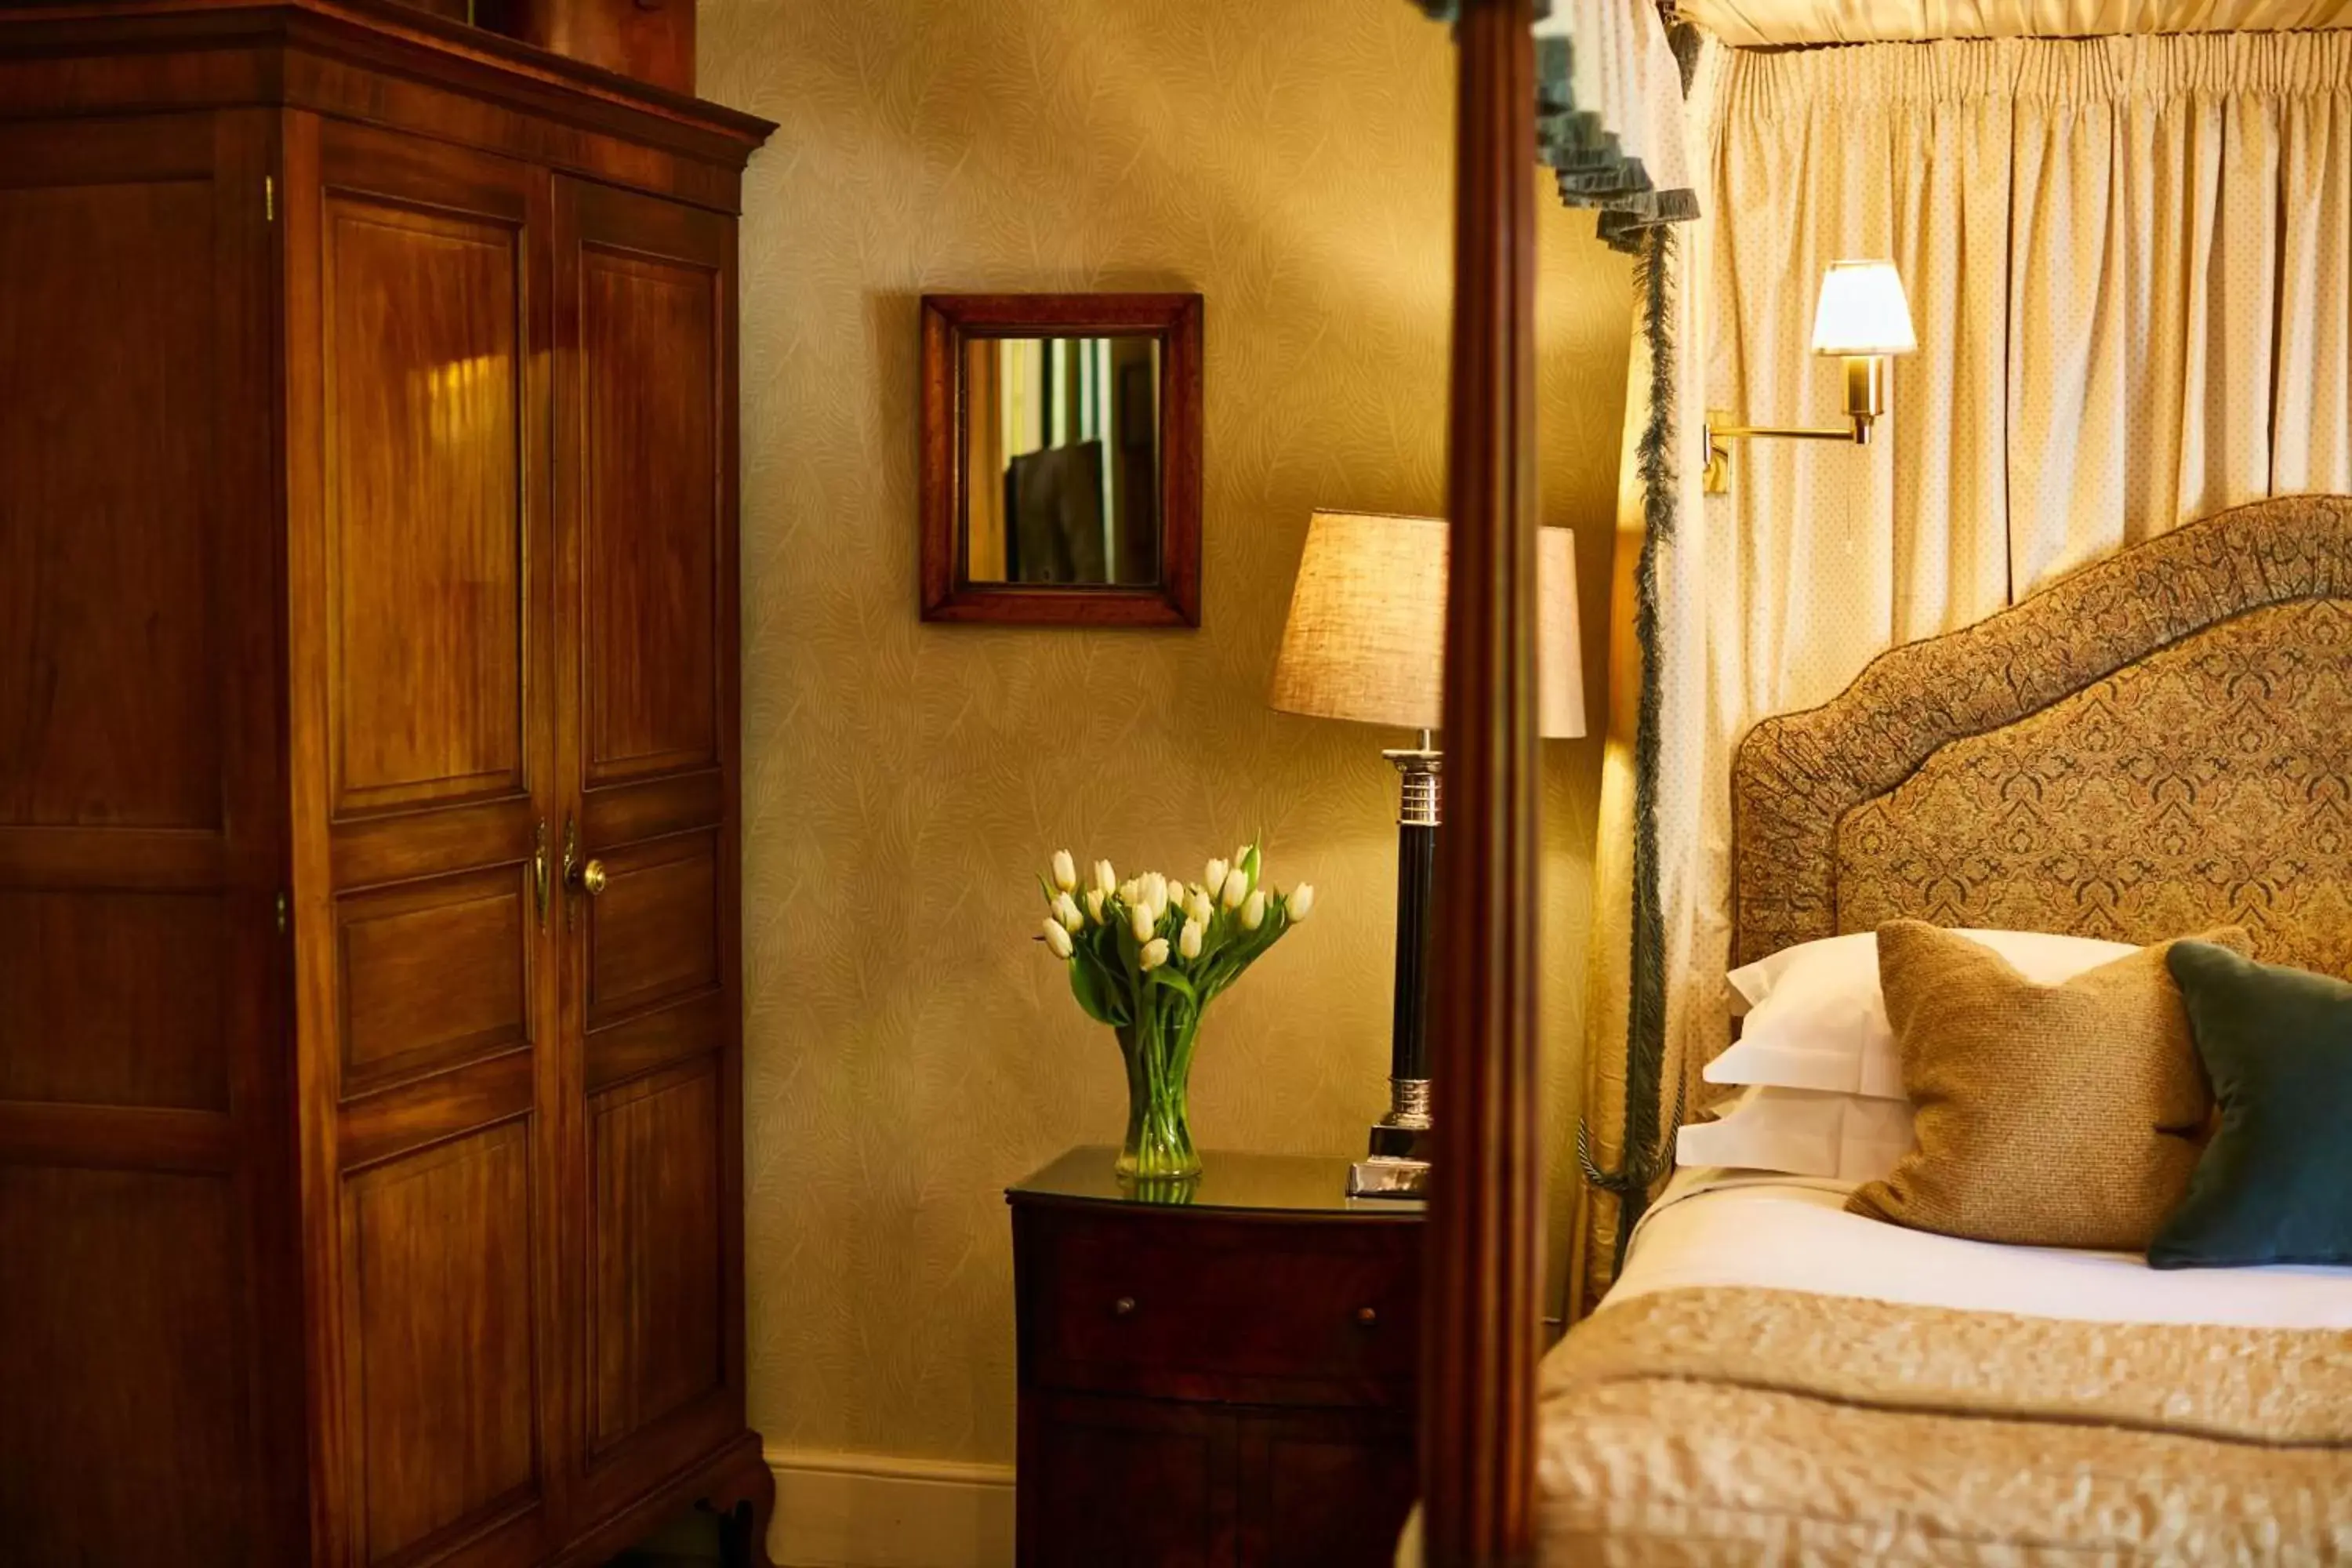 Bedroom in The Bath Priory - A Relais & Chateaux Hotel